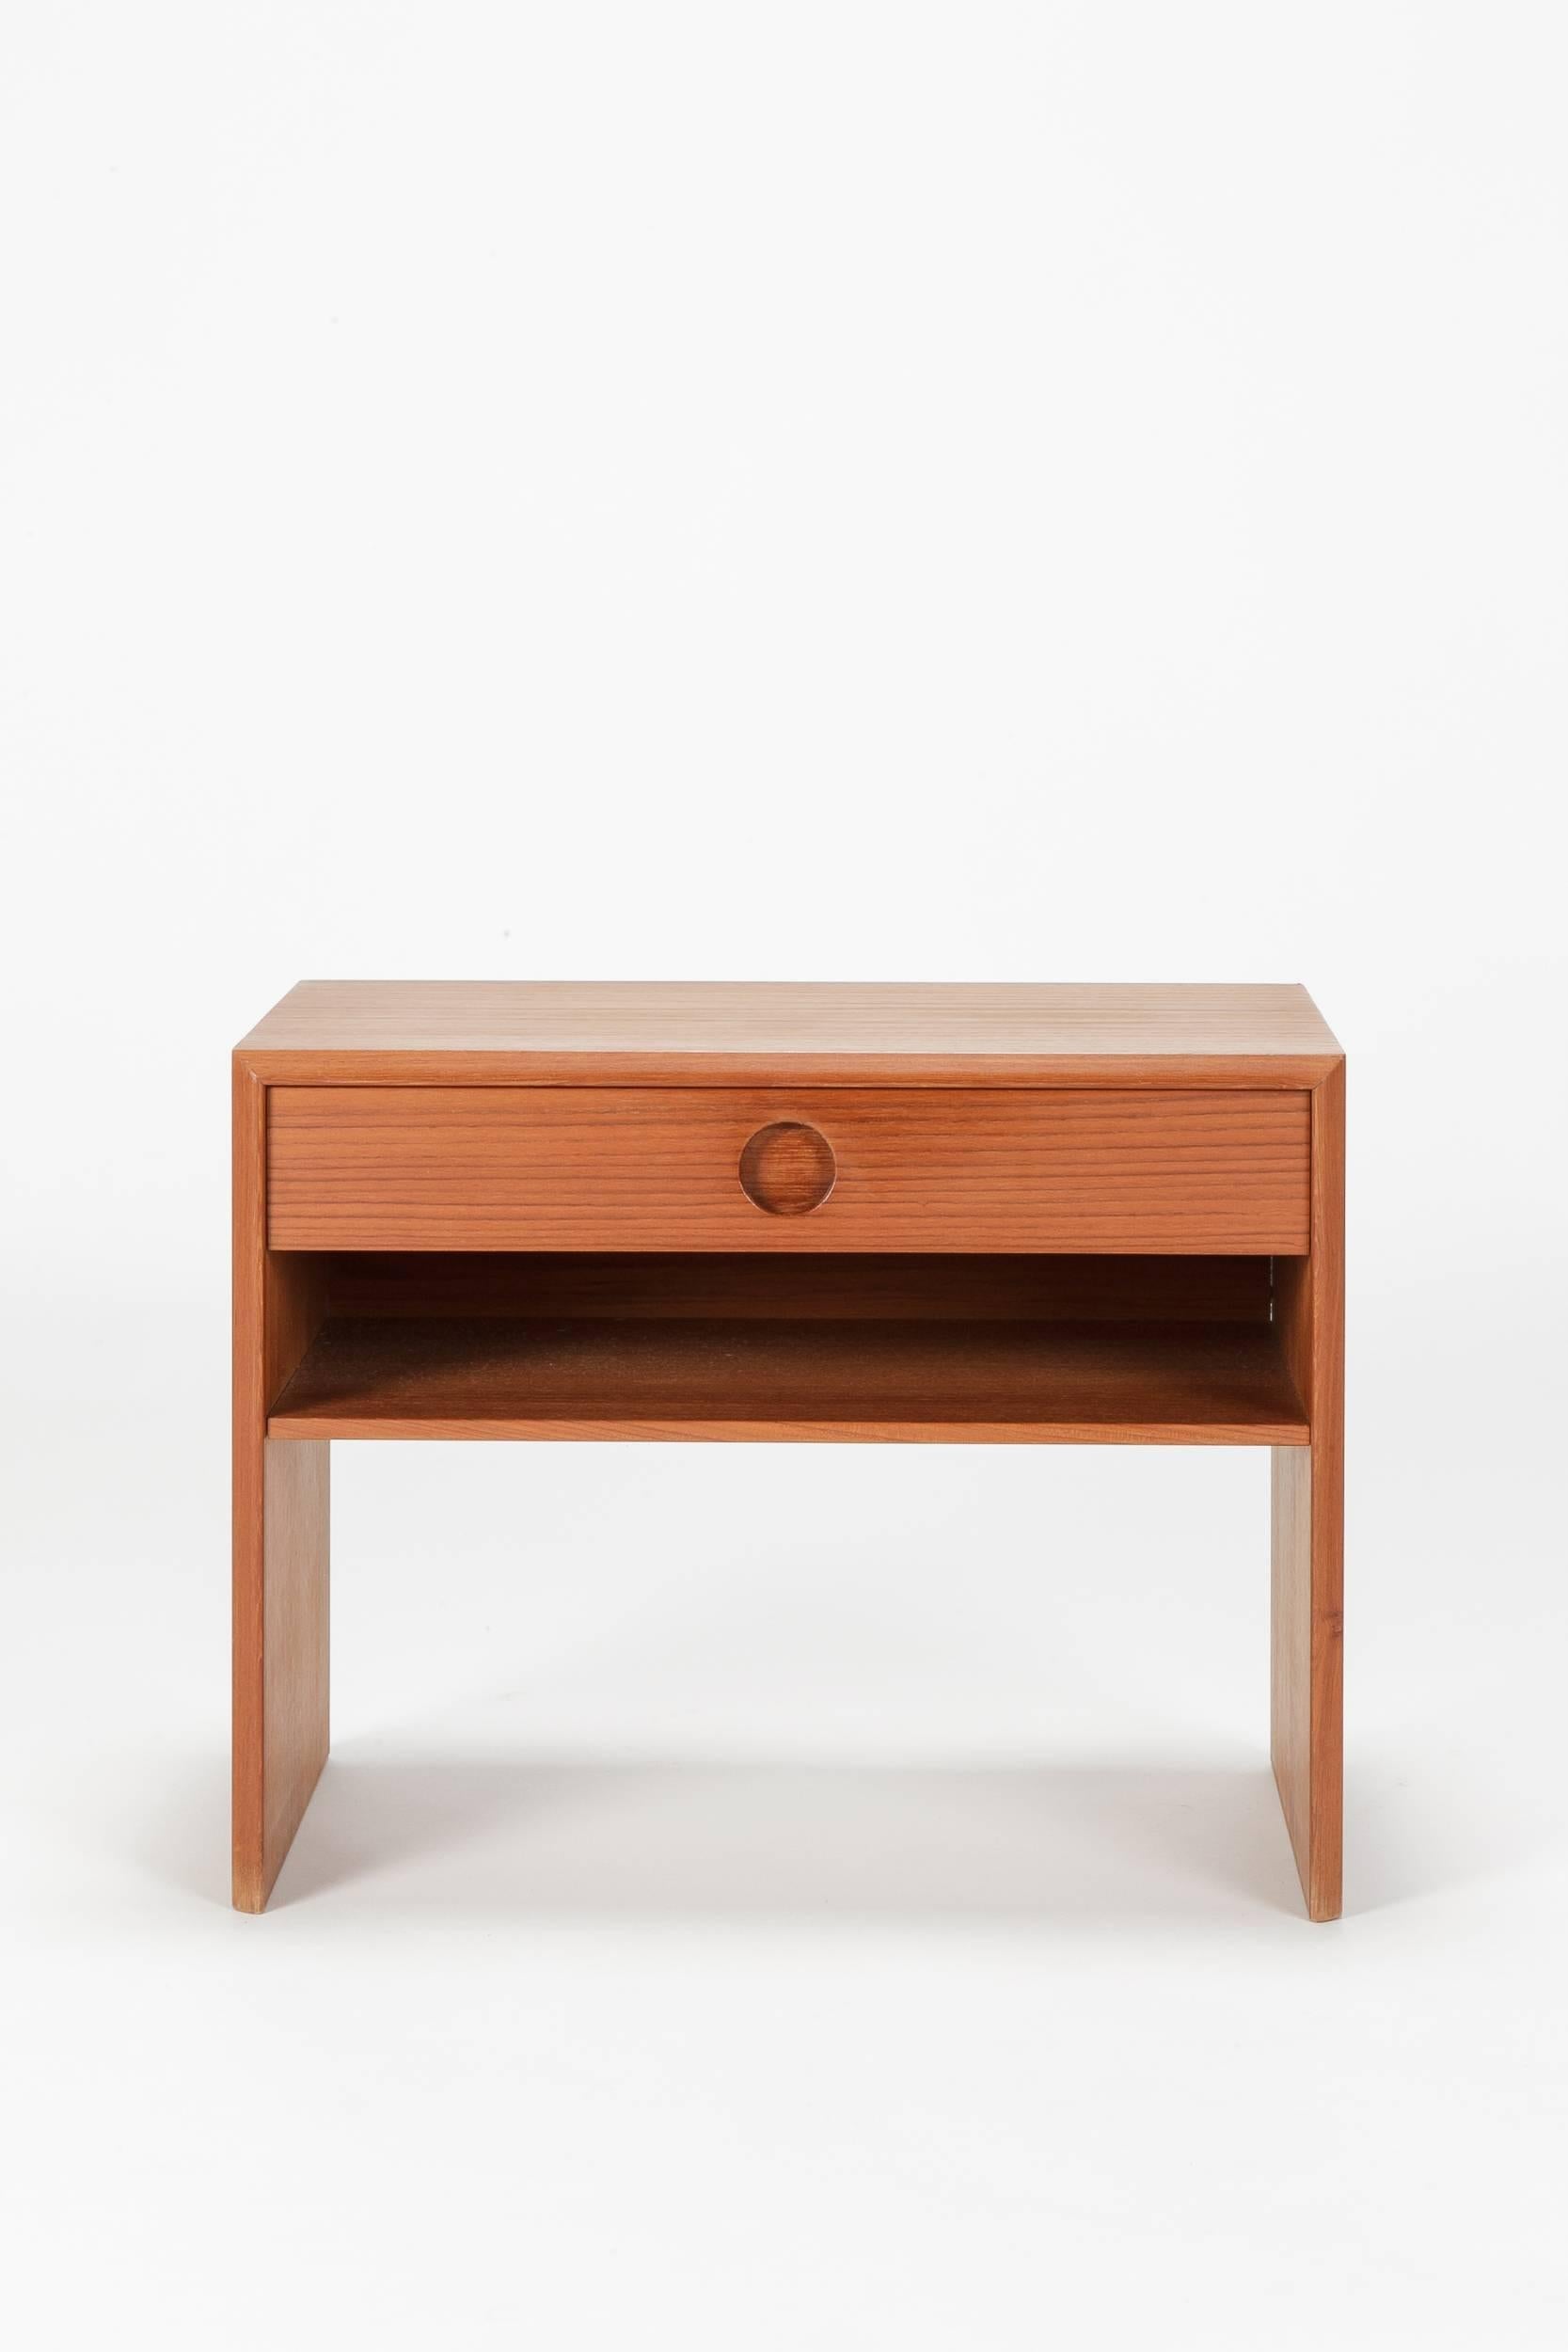 Incredibly well-made nightstand by Kai Kristiansen, manufactured in the late 1960s by Vildbjerg Möbelfabrik, Denmark . Impressive veneer appearance from one piece of wood that covers the whole surface! Bevelled front edge, small drawer with a round